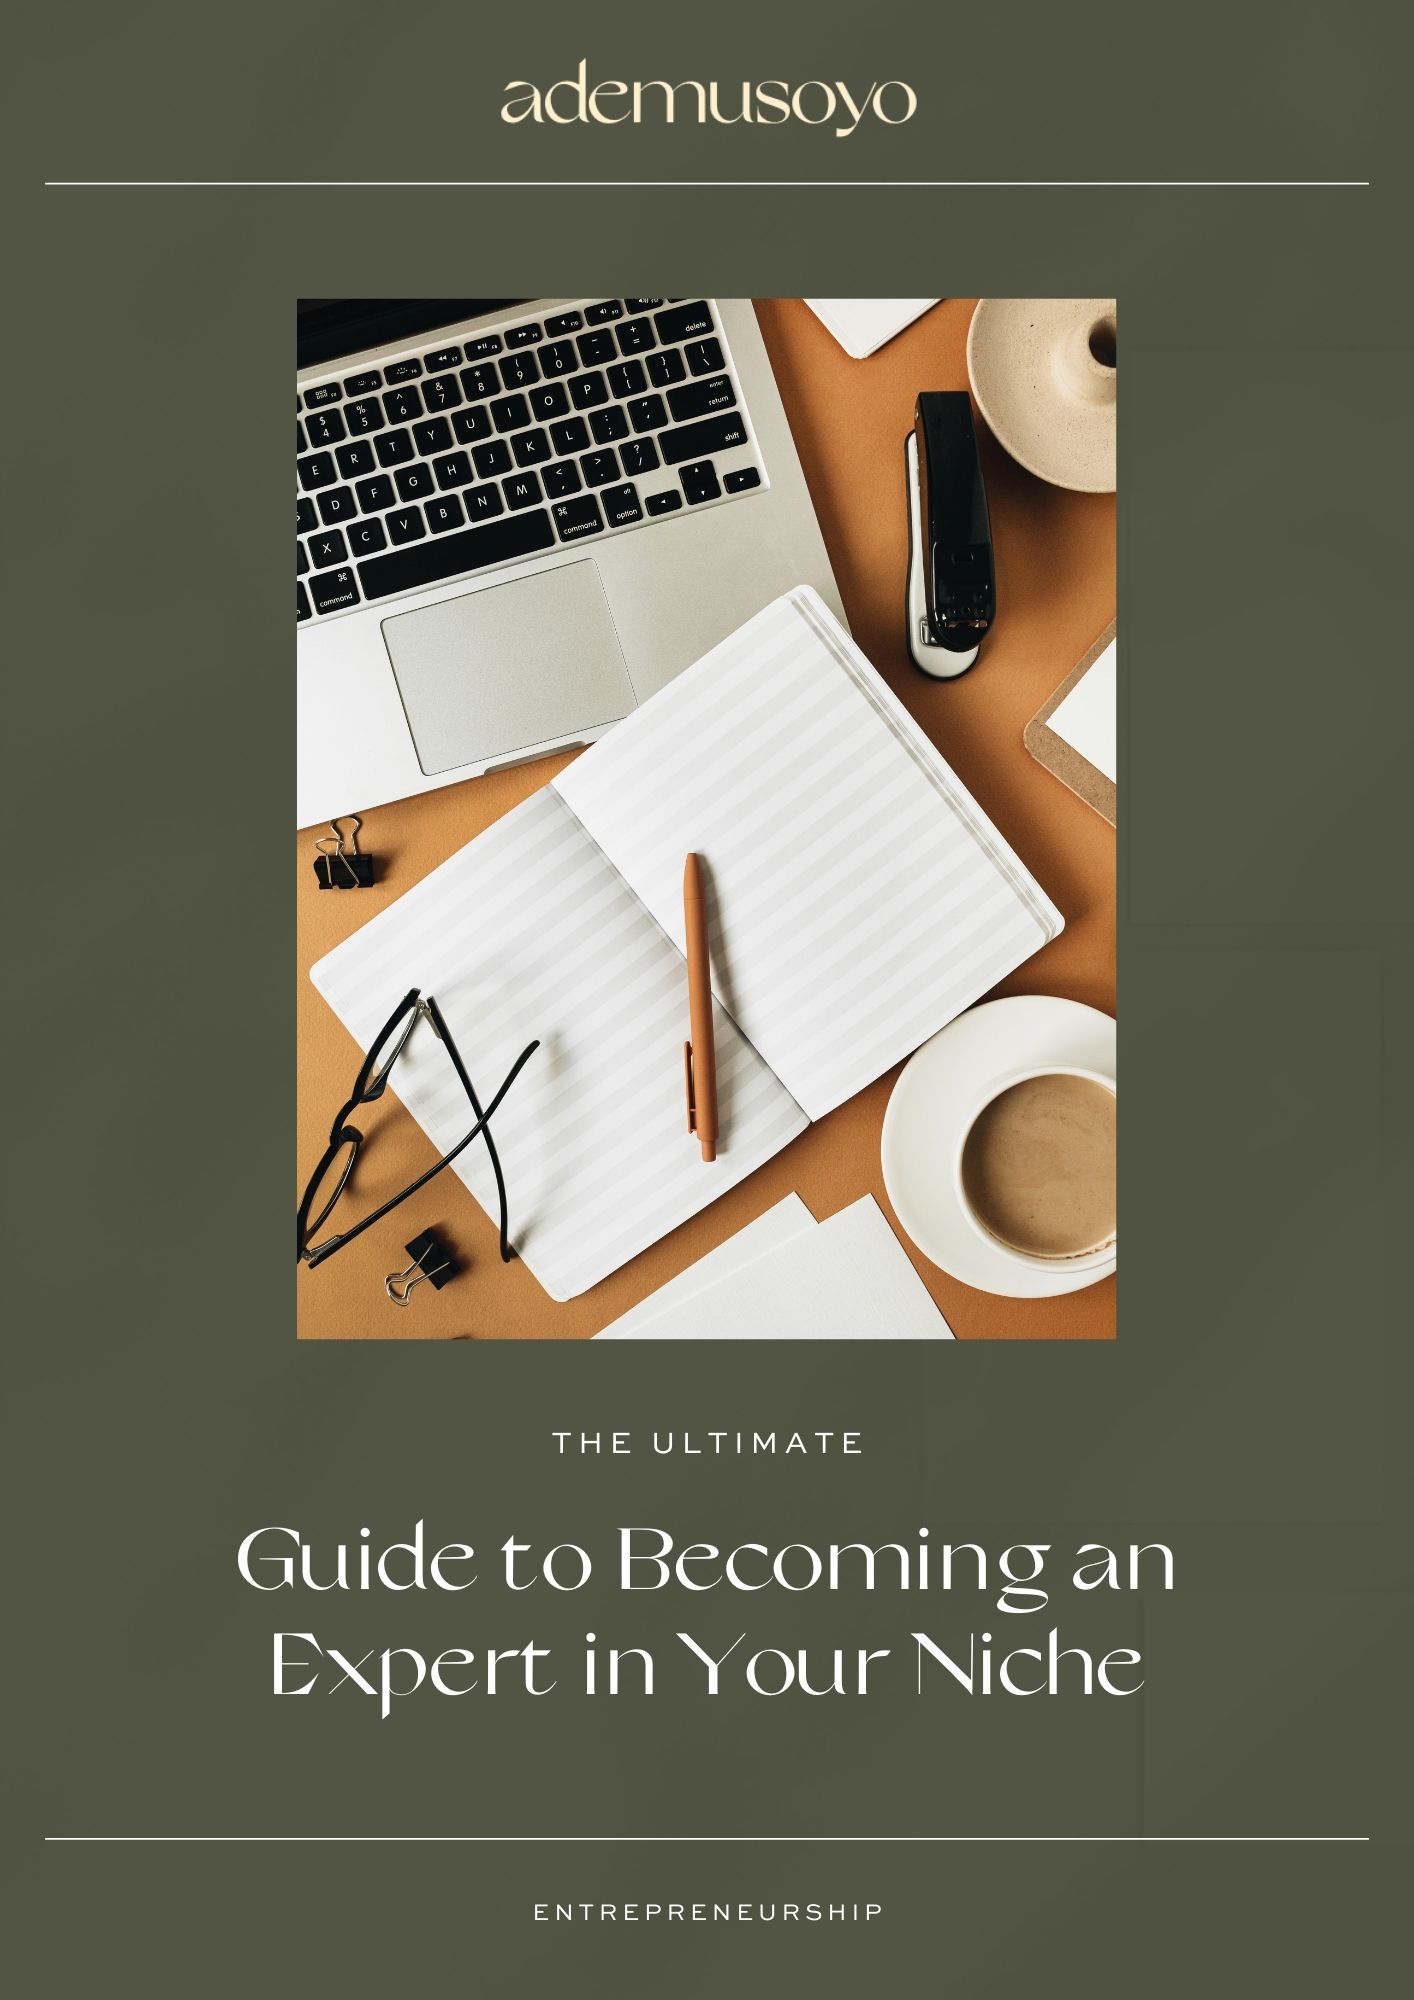 The Ultimate Guide to Becoming an Expert in Your Niche